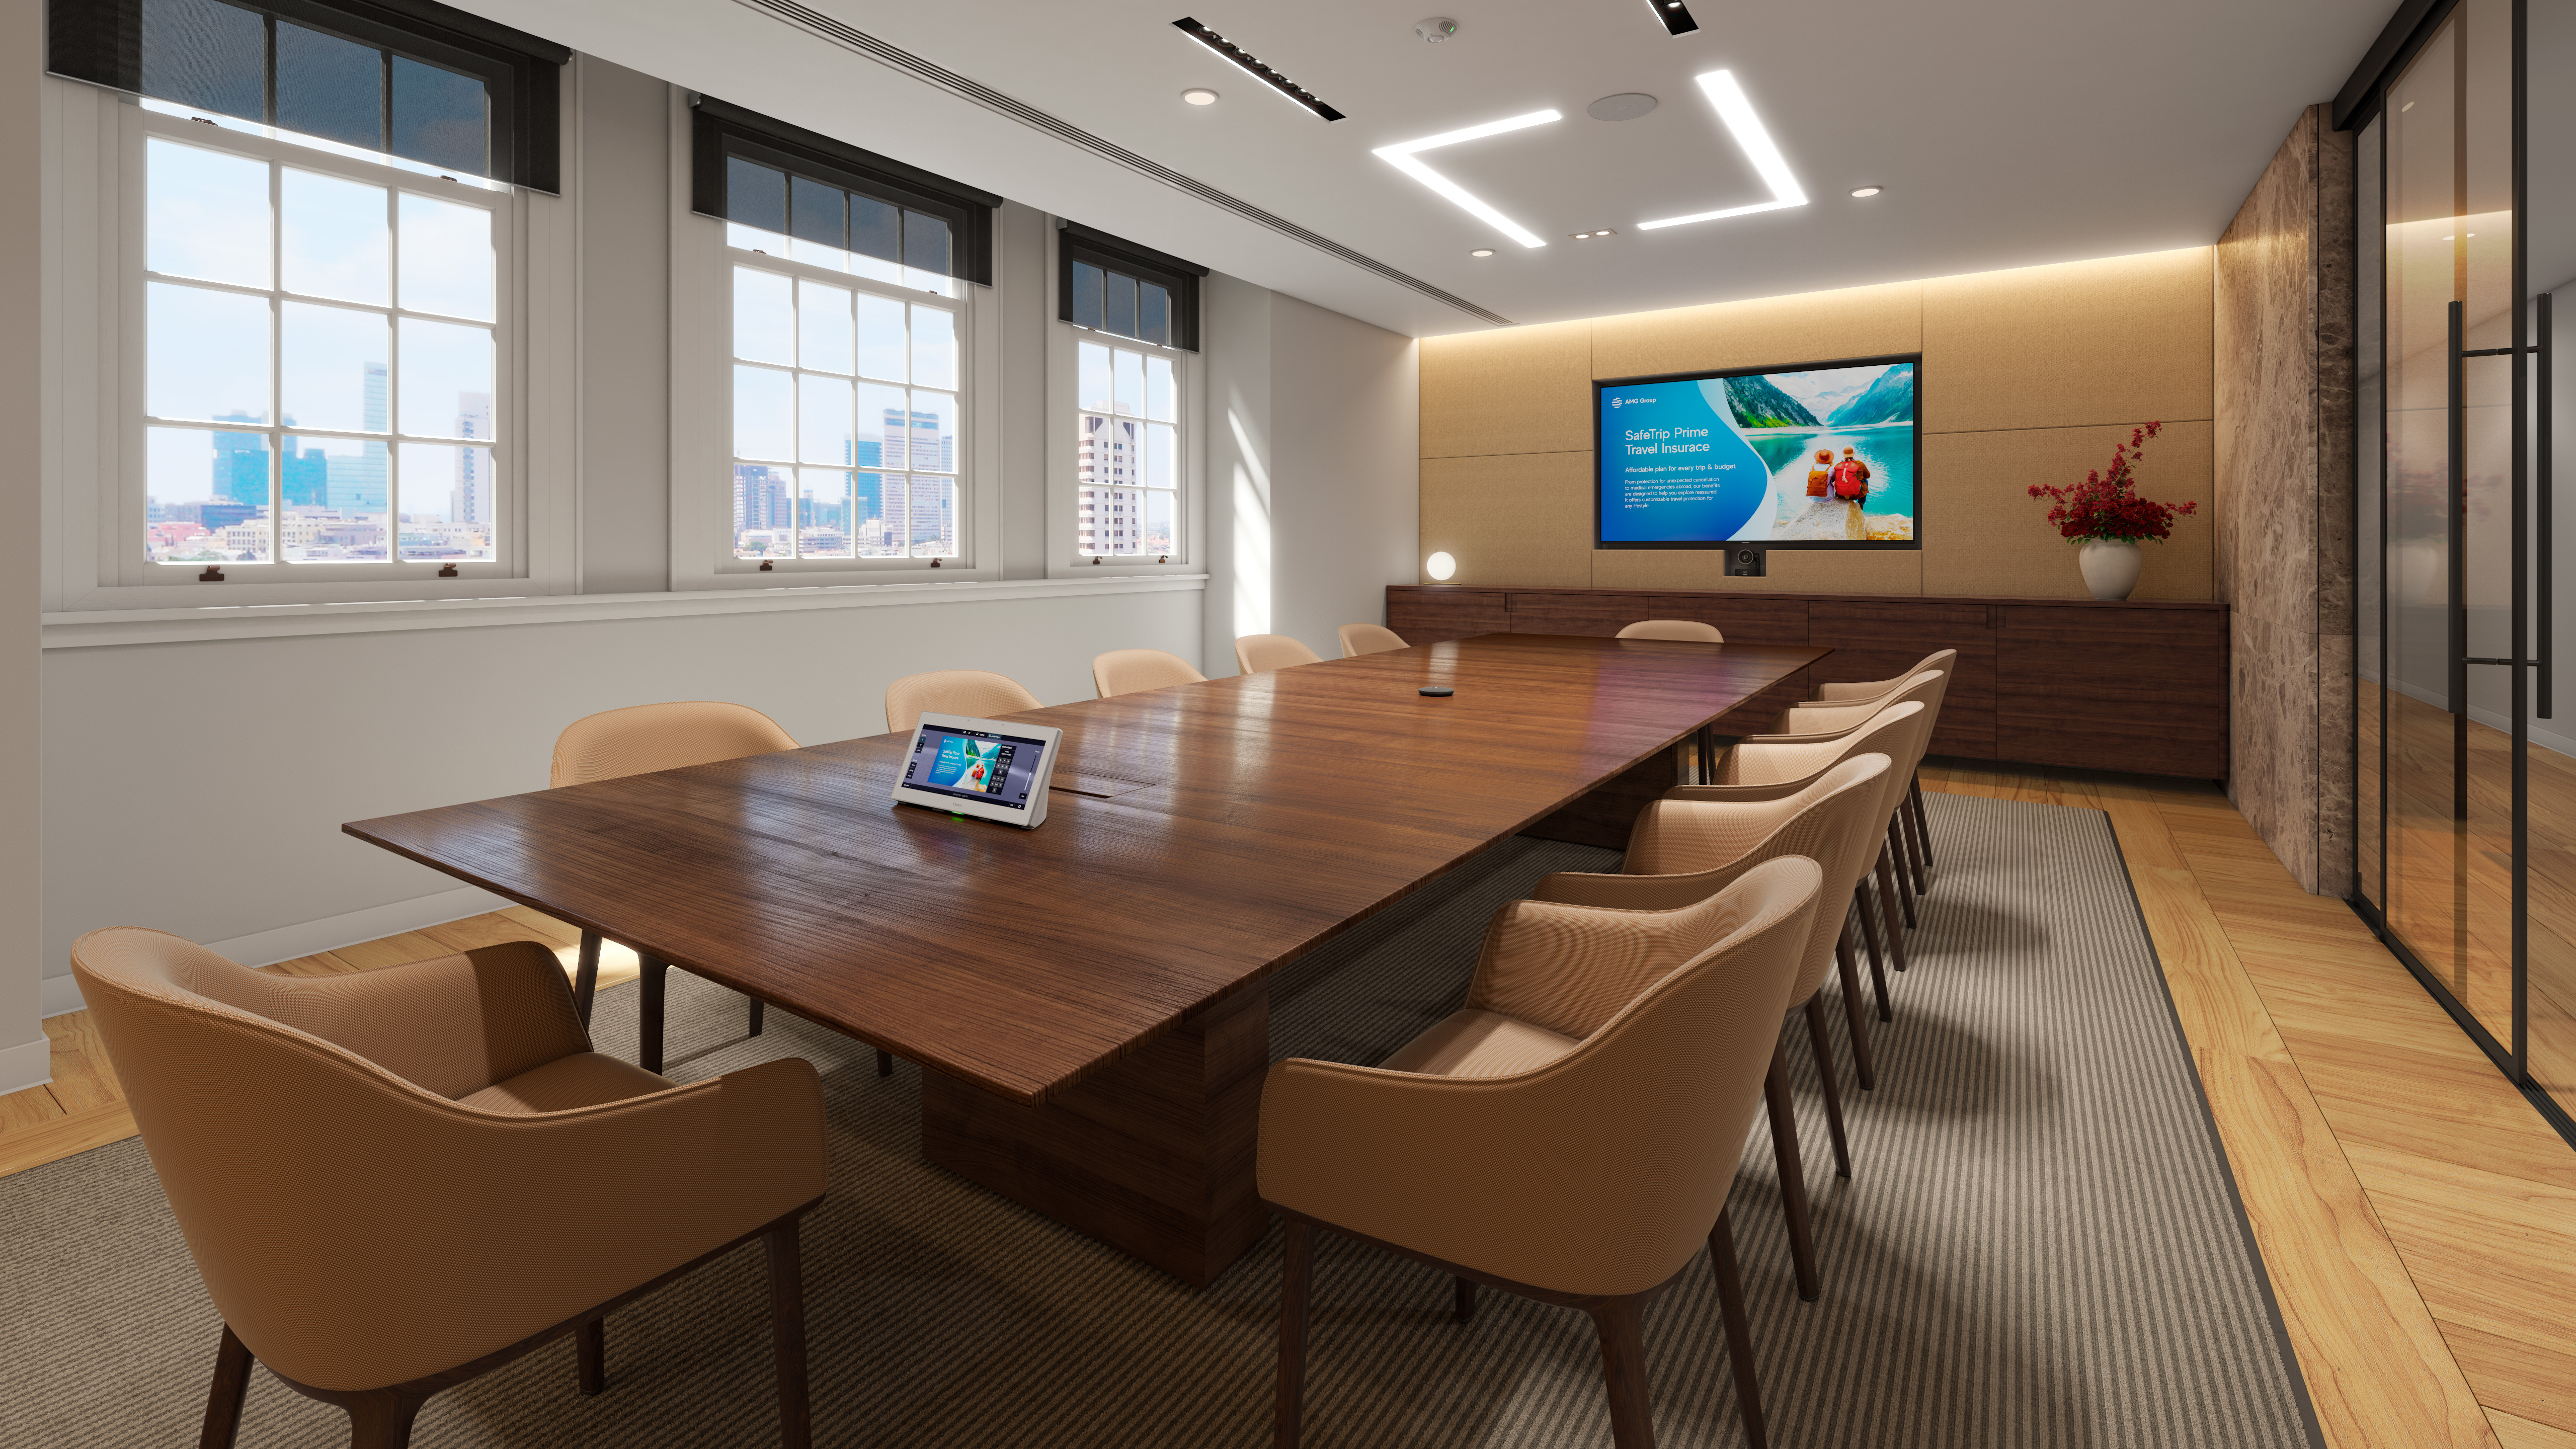 Conference room with automated AV control system equipment